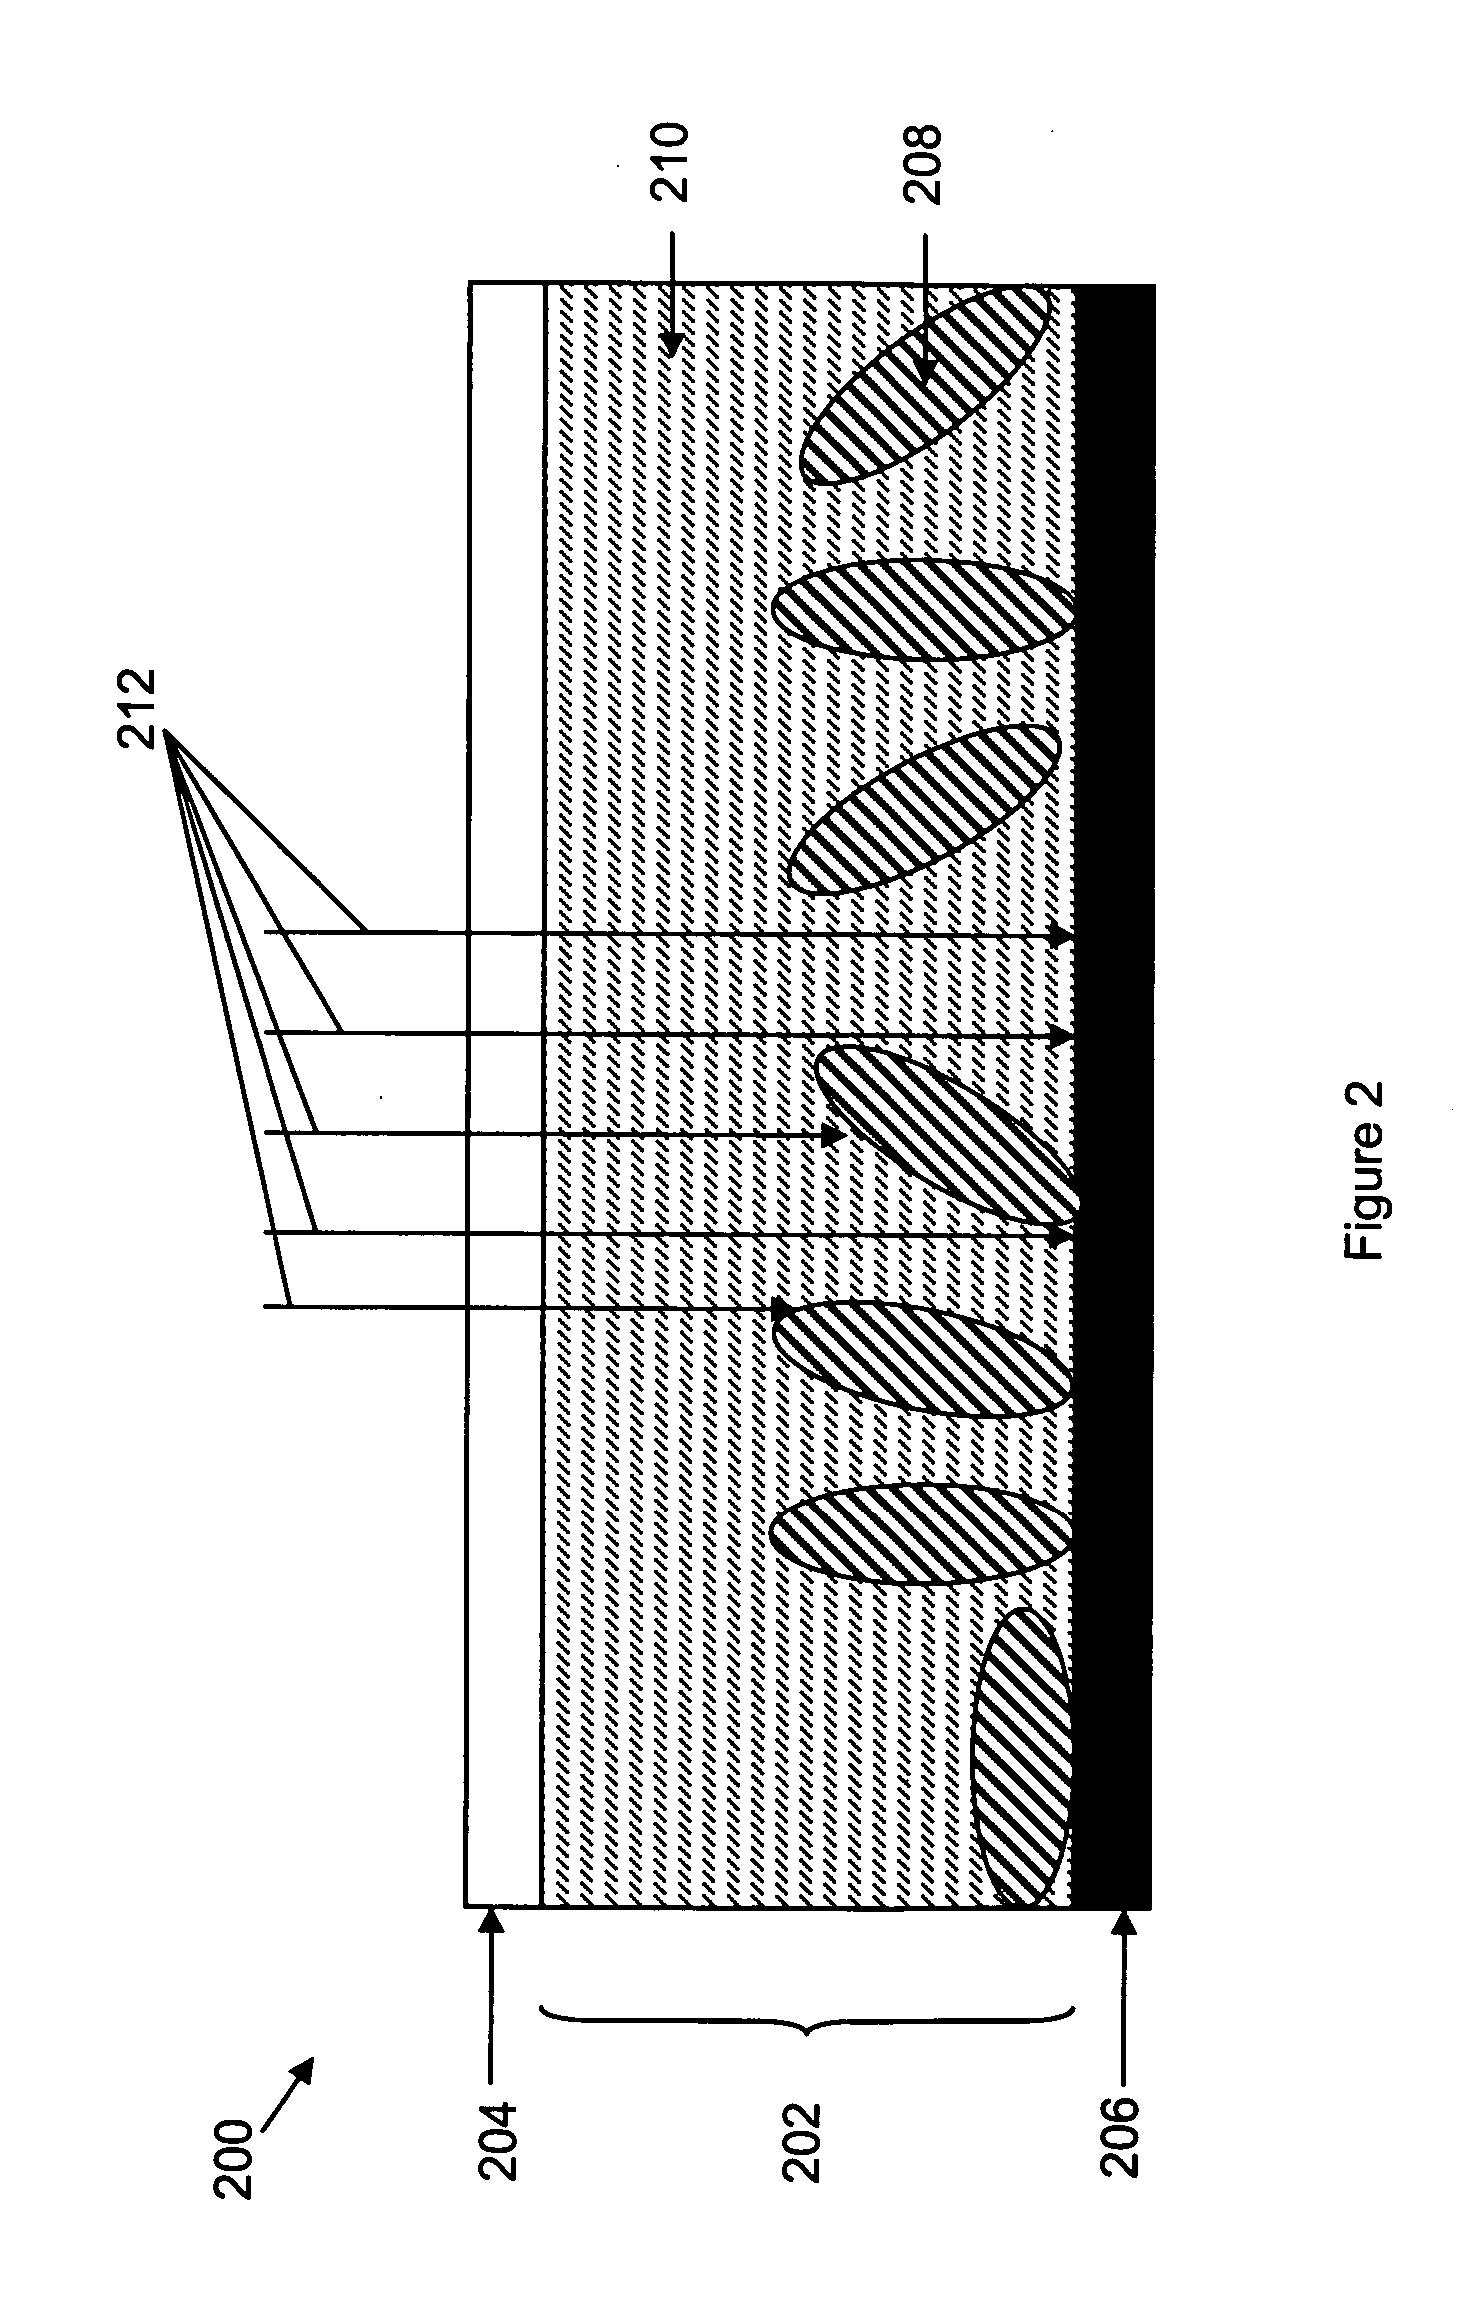 Photoactive devices and components with enhanced efficiency